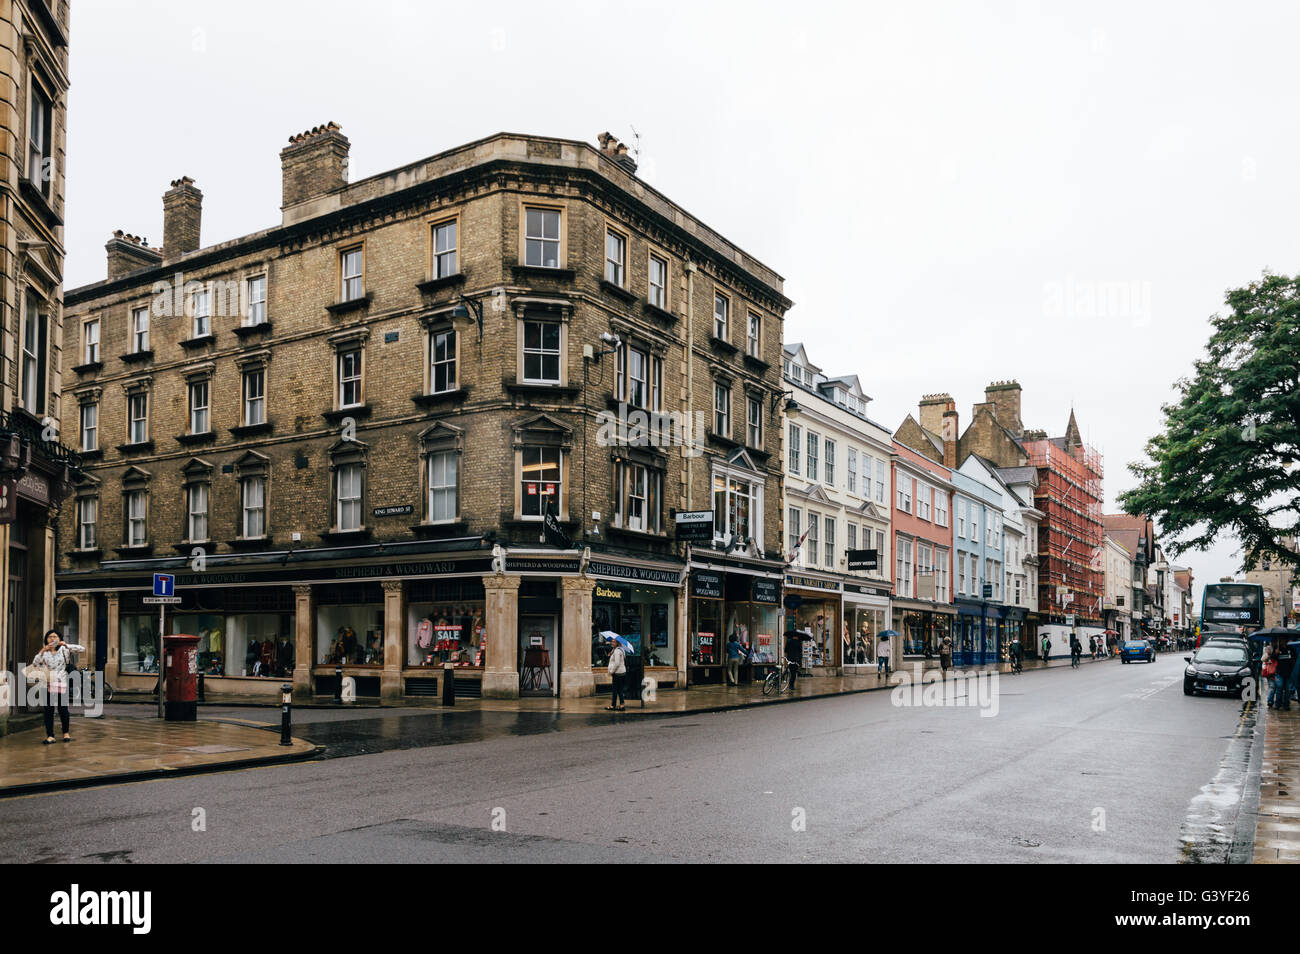 Oxford, UK - August 12, 2015: High Street in Oxford a rainy day.  This street is the center of the city . Stock Photo